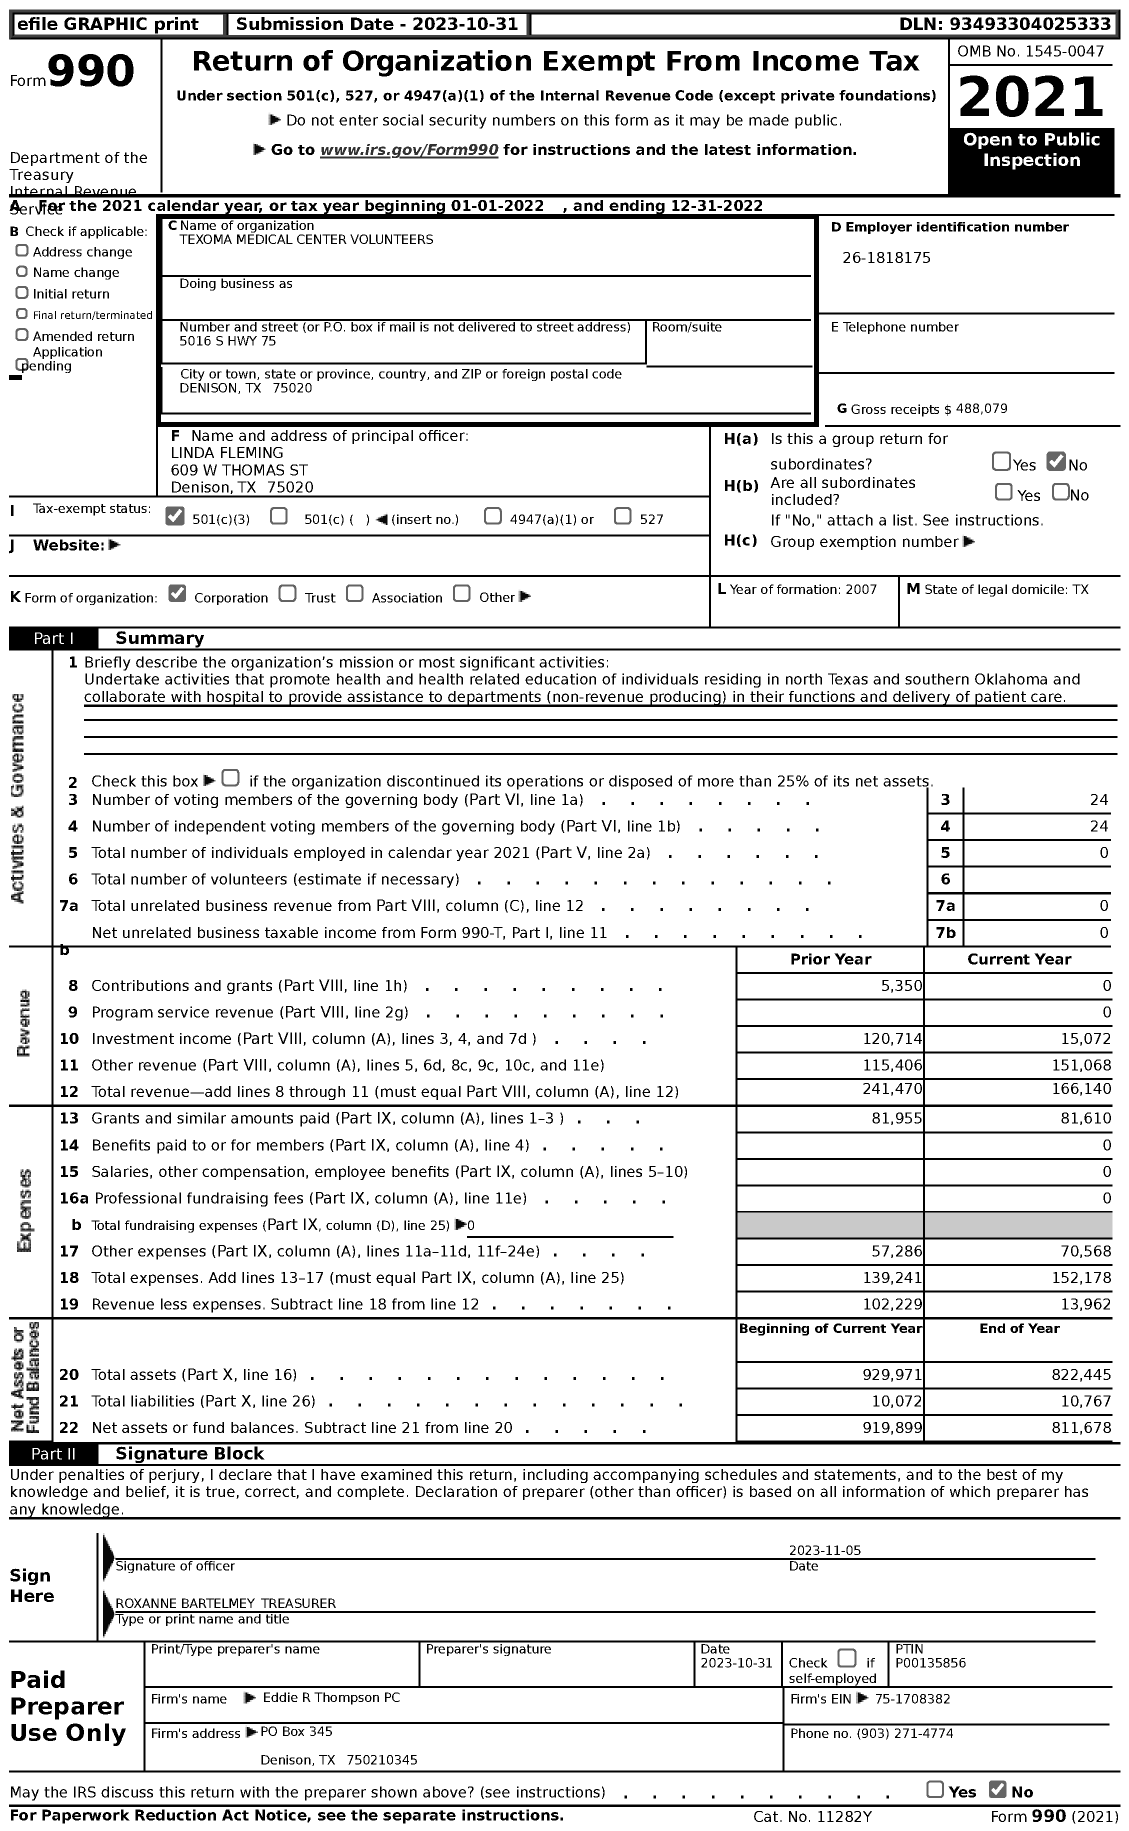 Image of first page of 2022 Form 990 for Texoma Medical Center Volunteers